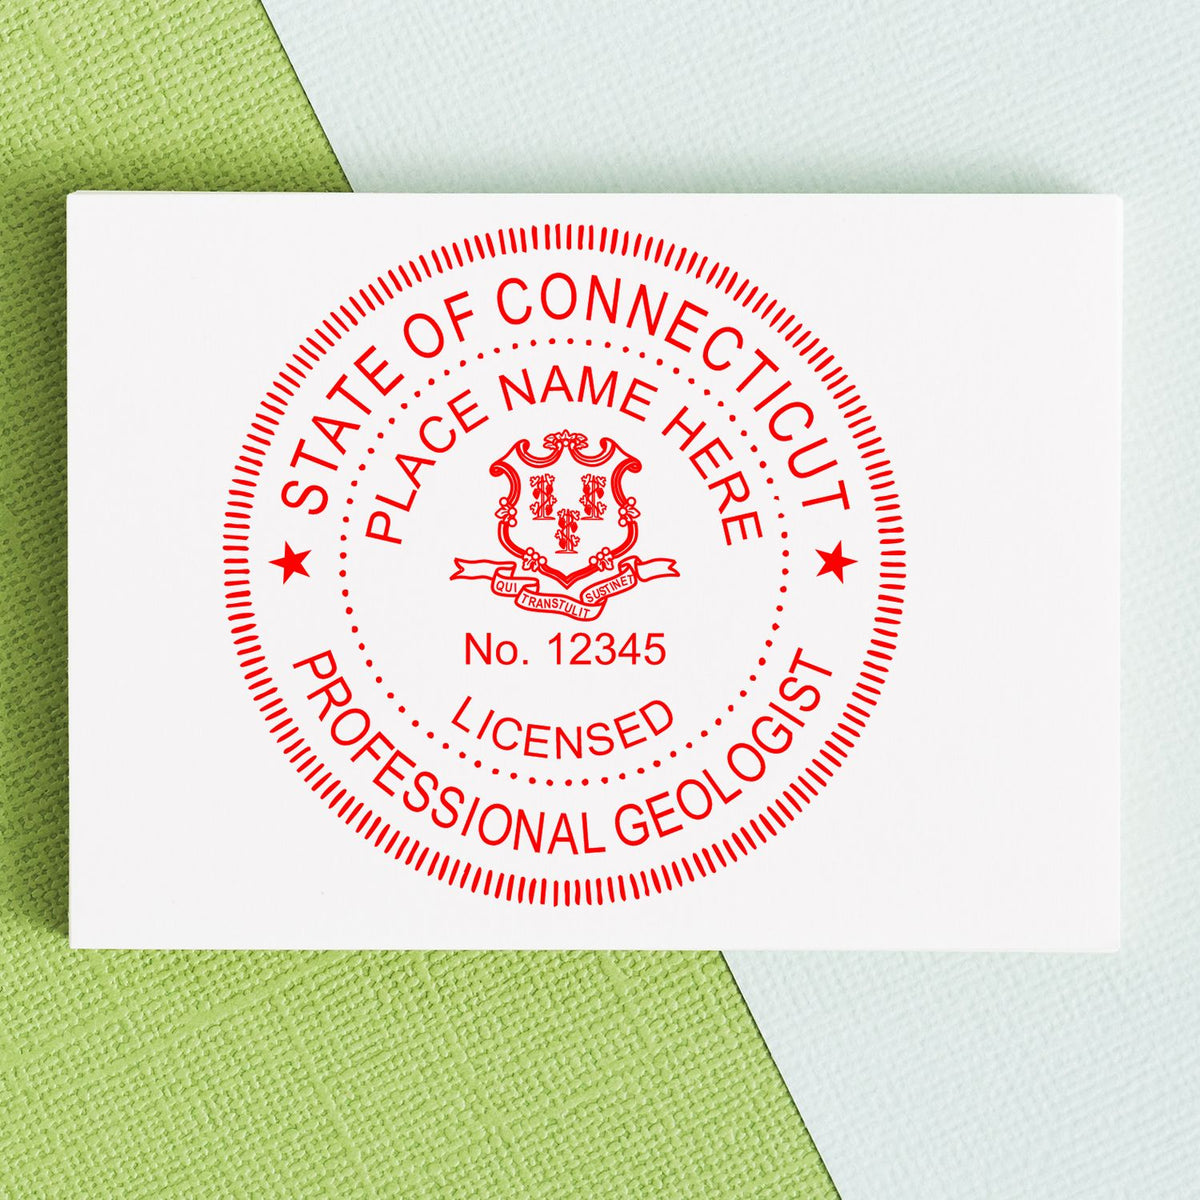 The Digital Connecticut Geologist Stamp, Electronic Seal for Connecticut Geologist stamp impression comes to life with a crisp, detailed image stamped on paper - showcasing true professional quality.